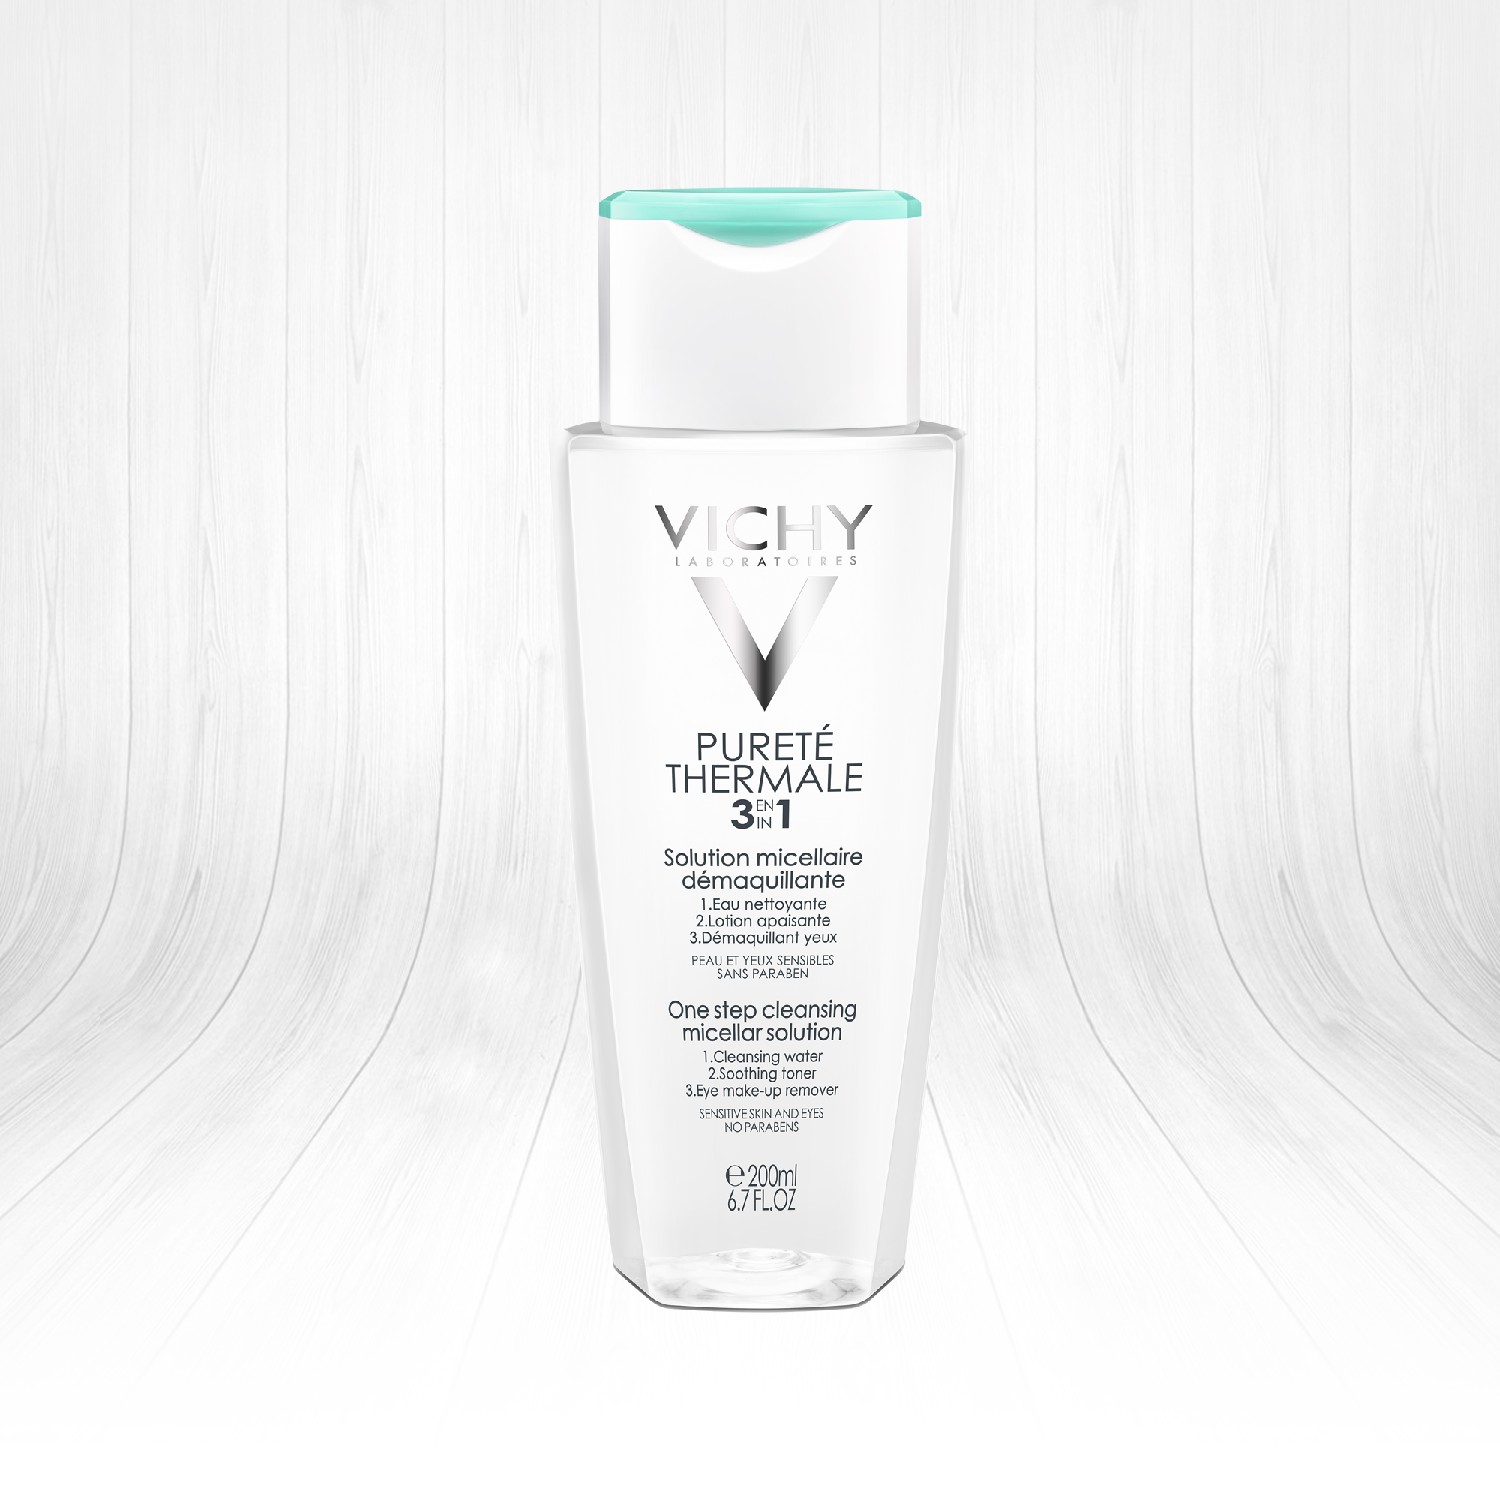 Vichy Purete Thermale in Micellaire Solution